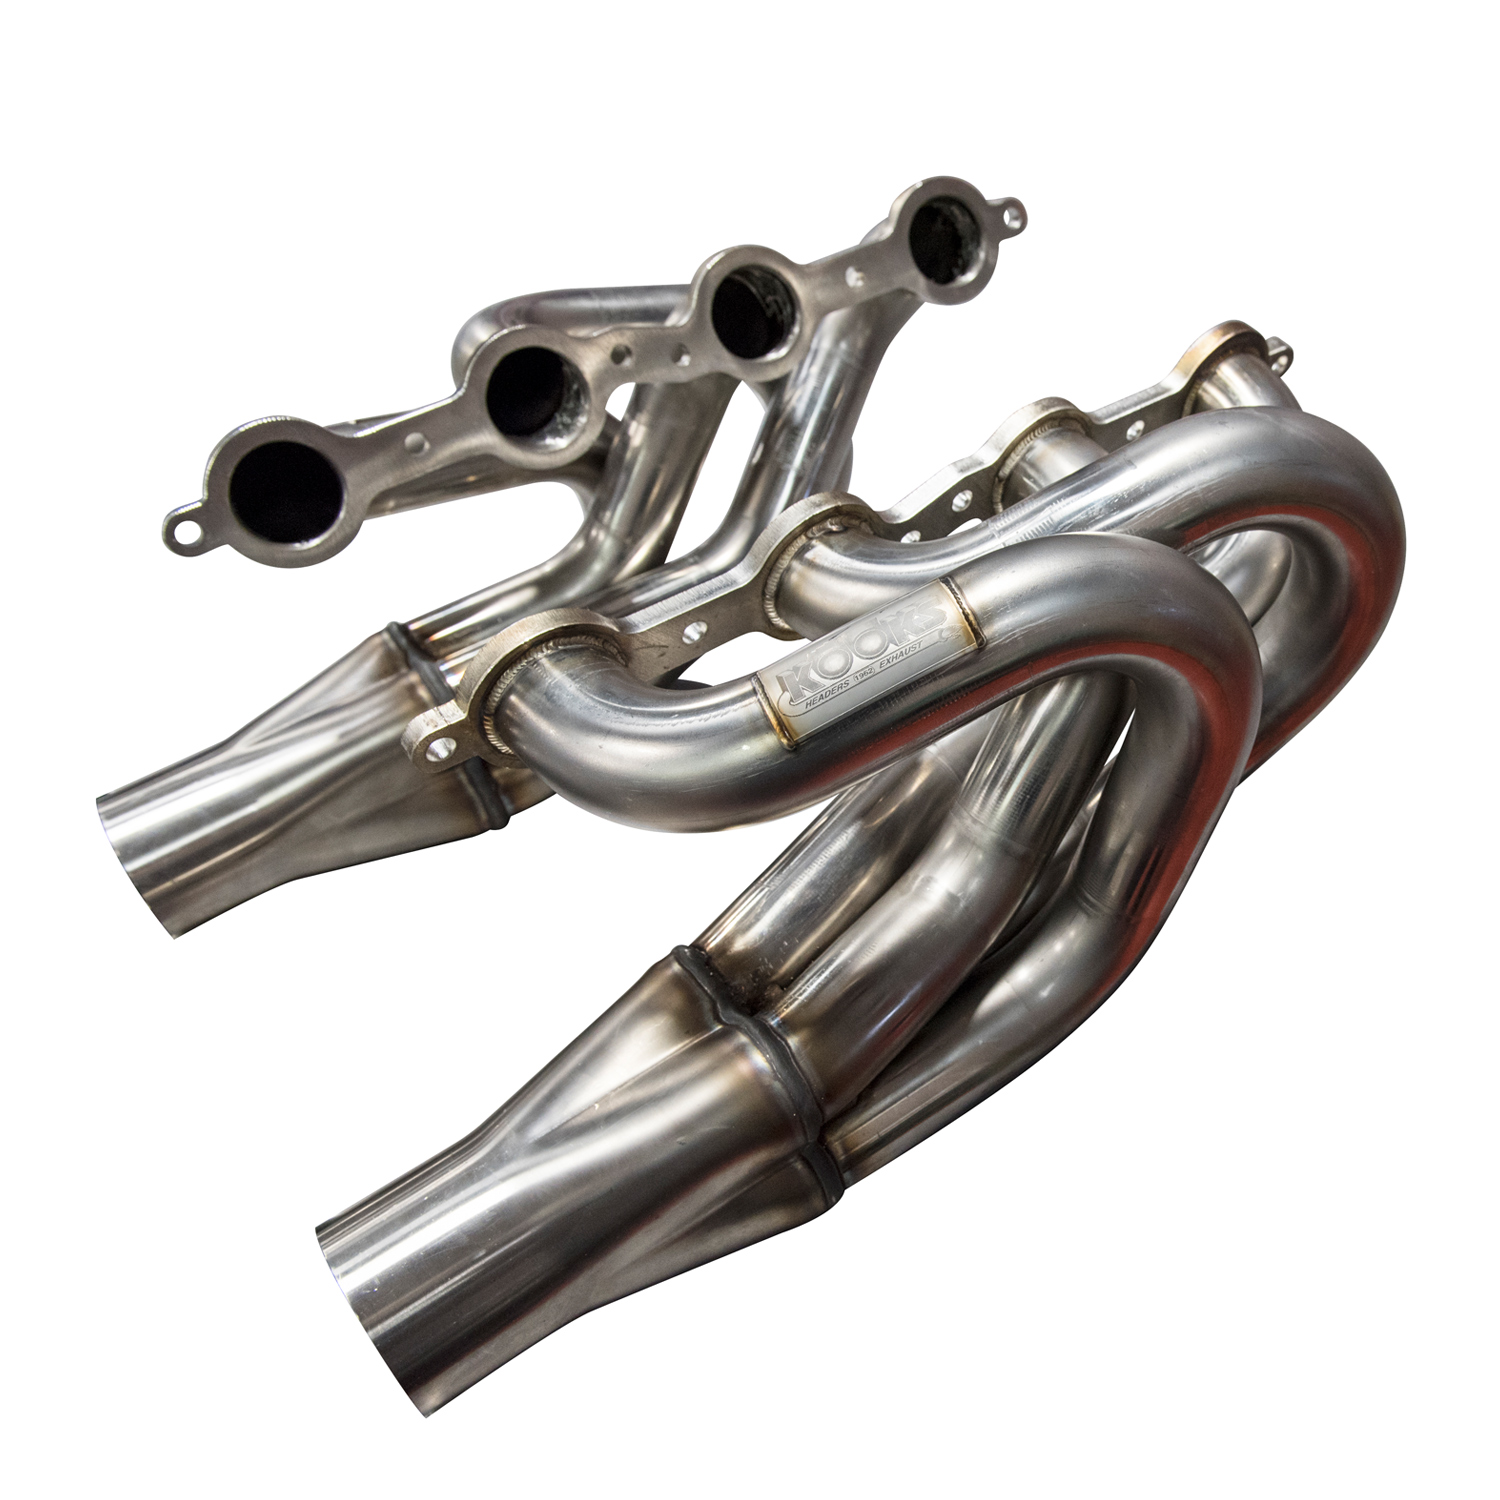 Stainless Steel Turbo Shorty Headers 1.875 x 3" Downswept 14 Gauge Stainless Steel